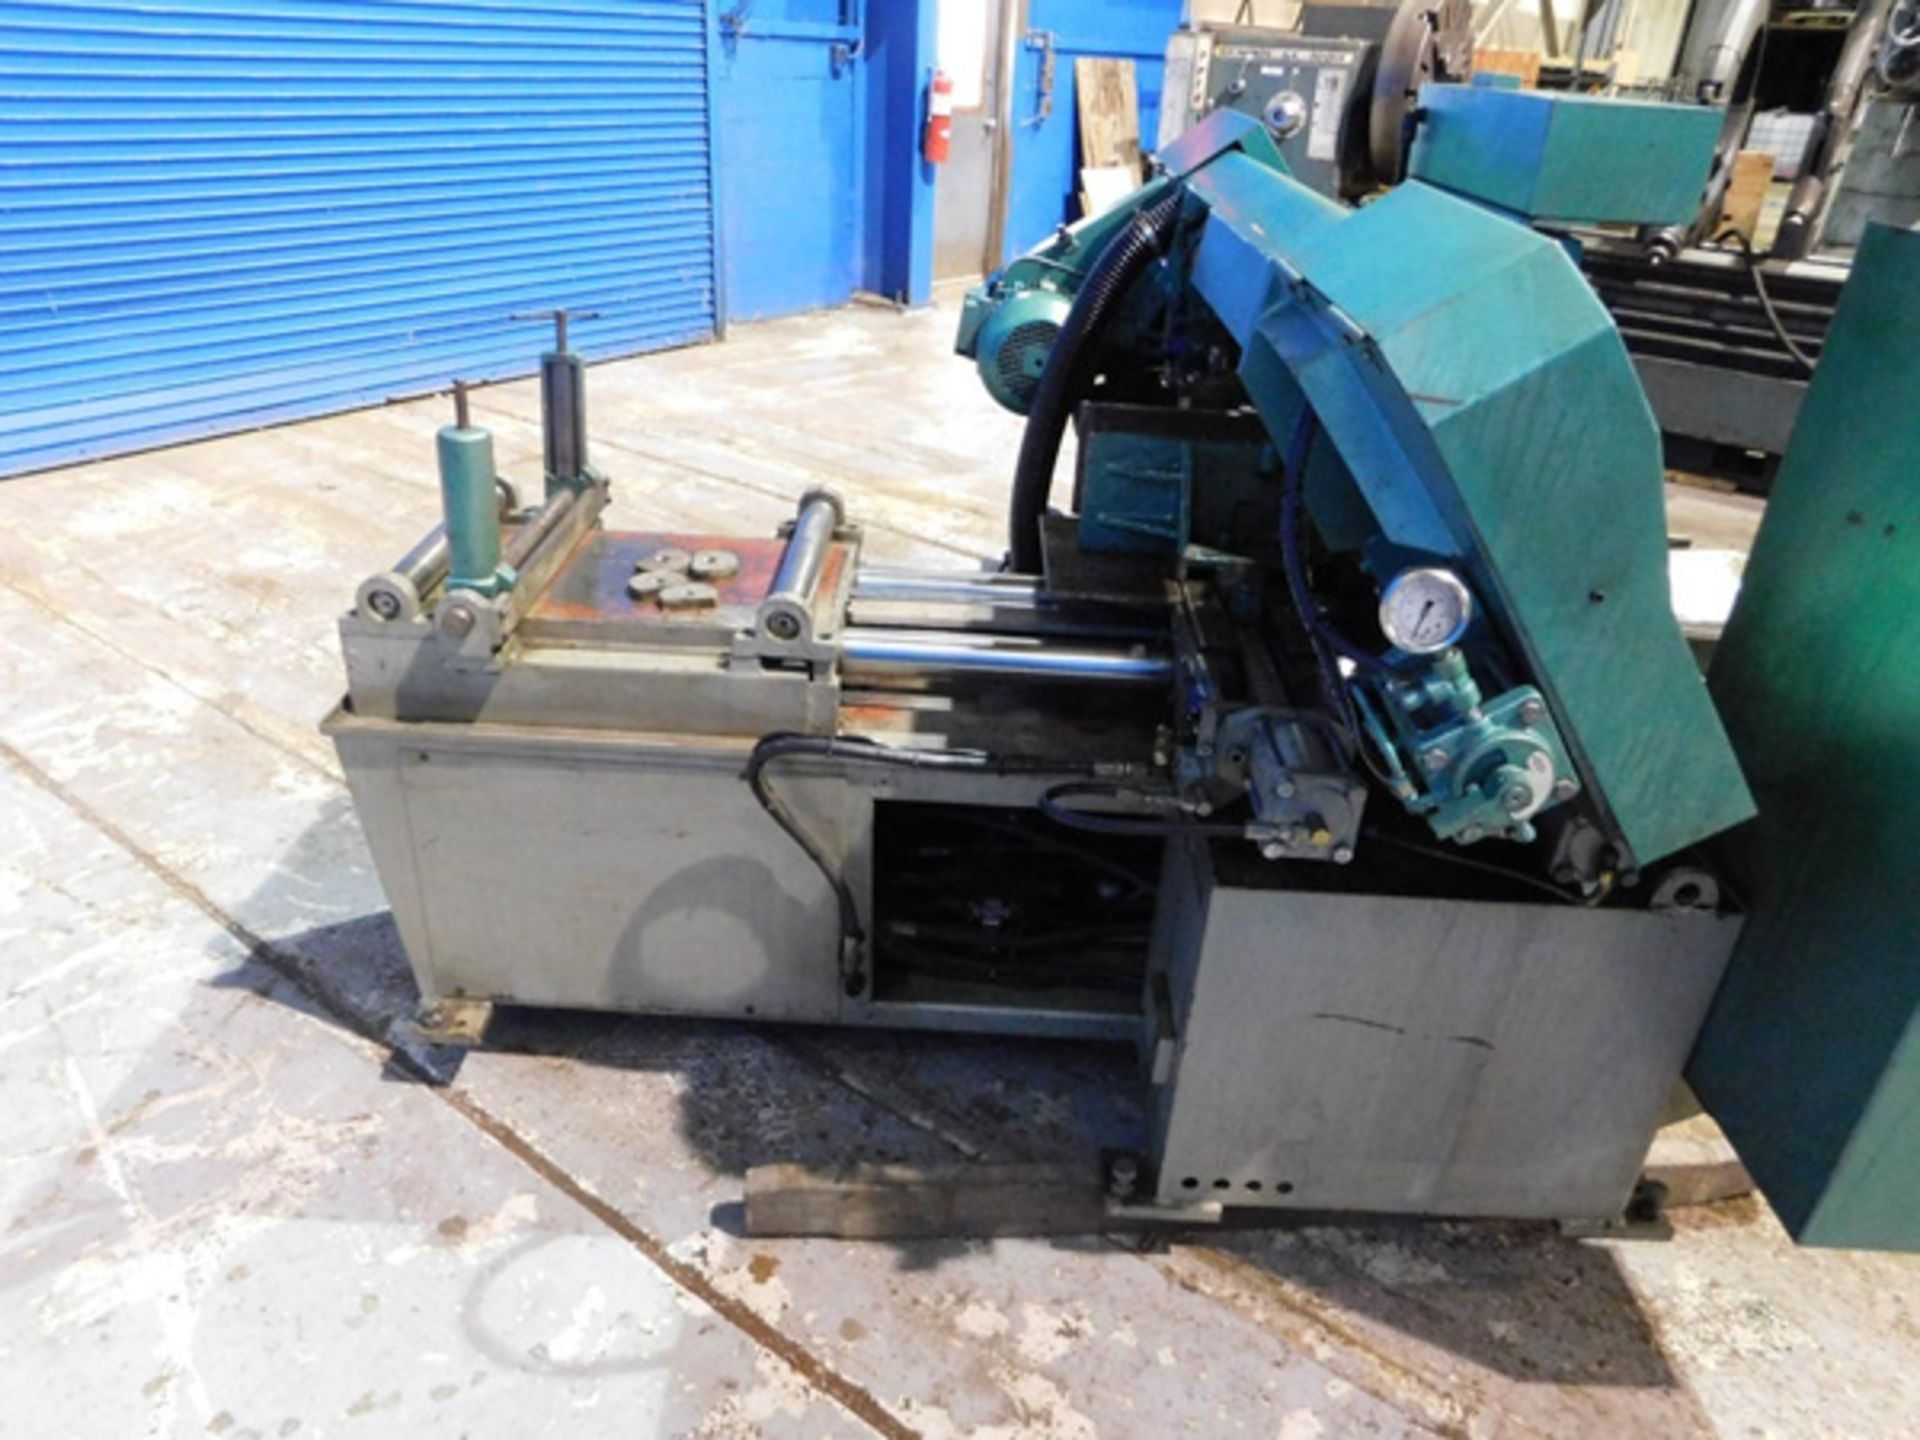 2005 Peerless Automatic Horizontal Band Saw, 12" x 13.4" - Mdl: HB1212NC - S/N: C941269 - Location - Image 9 of 12